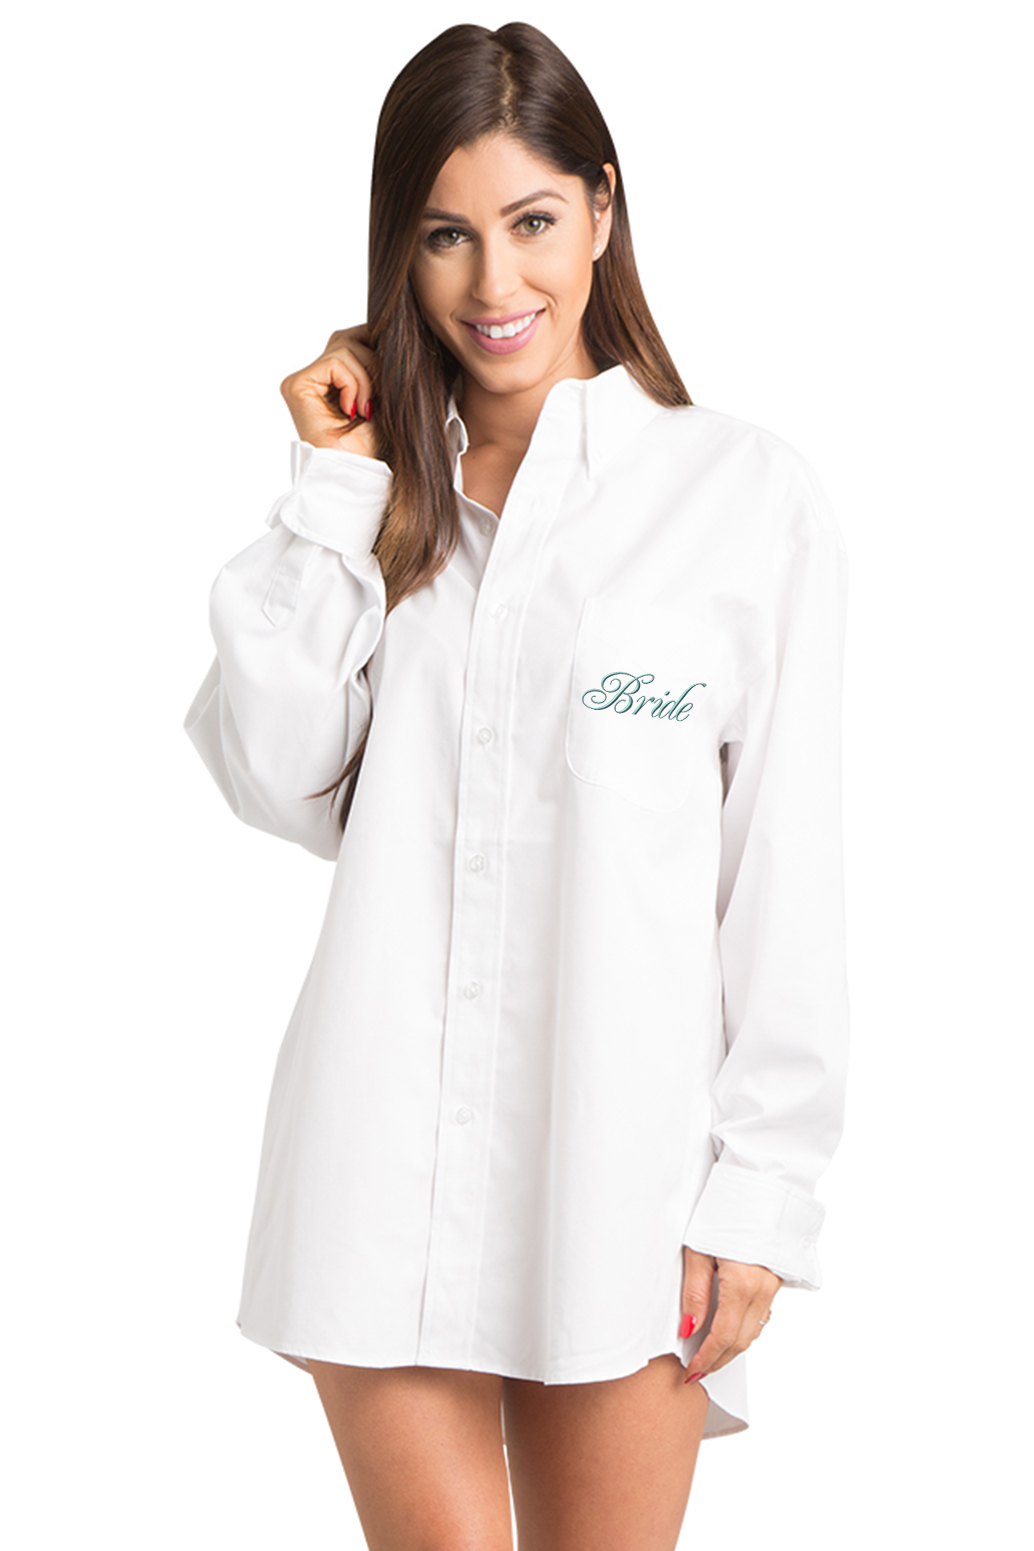 Oxford Getting Ready Gift Bridesmaid and Bride Monogram Oversized Button Up  Shirt